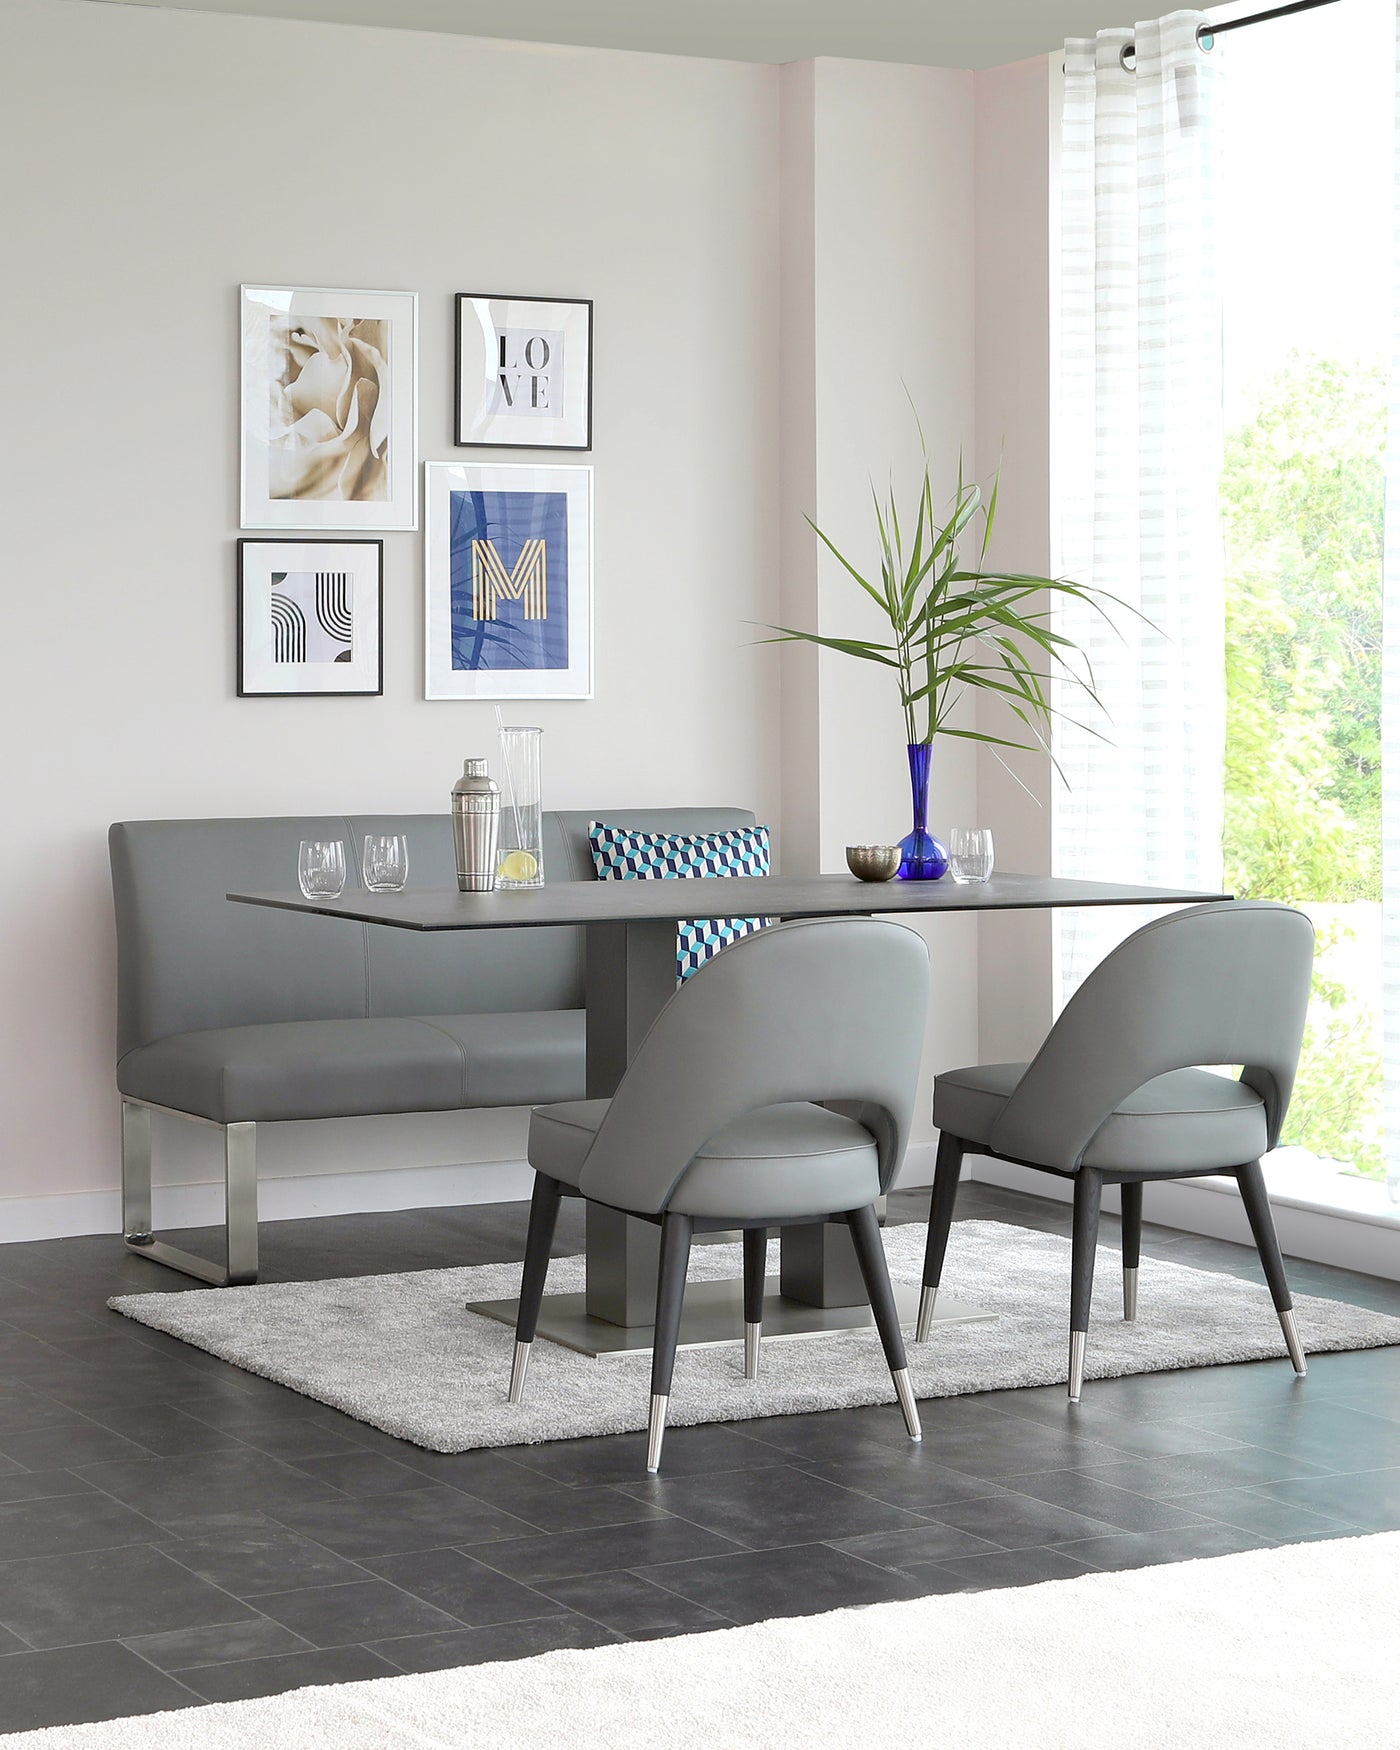 Modern dining room furniture set featuring a sleek, rectangular table with a glass top and metal legs, complemented by a long, straight-lined bench and two curvaceous chairs upholstered in a matching grey fabric, all positioned on a soft grey area rug.